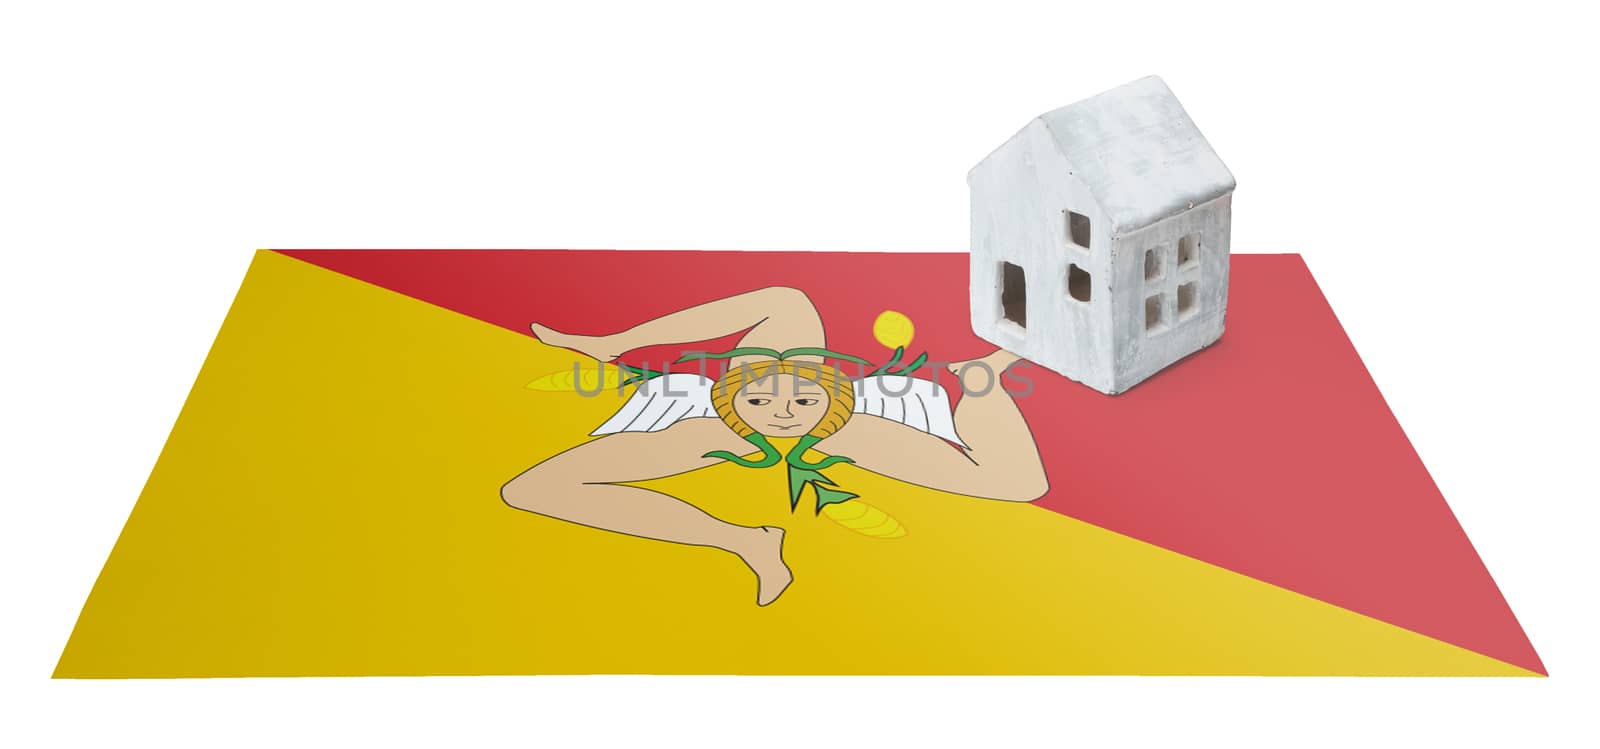 Small house on a flag - Living or migrating to Sicily